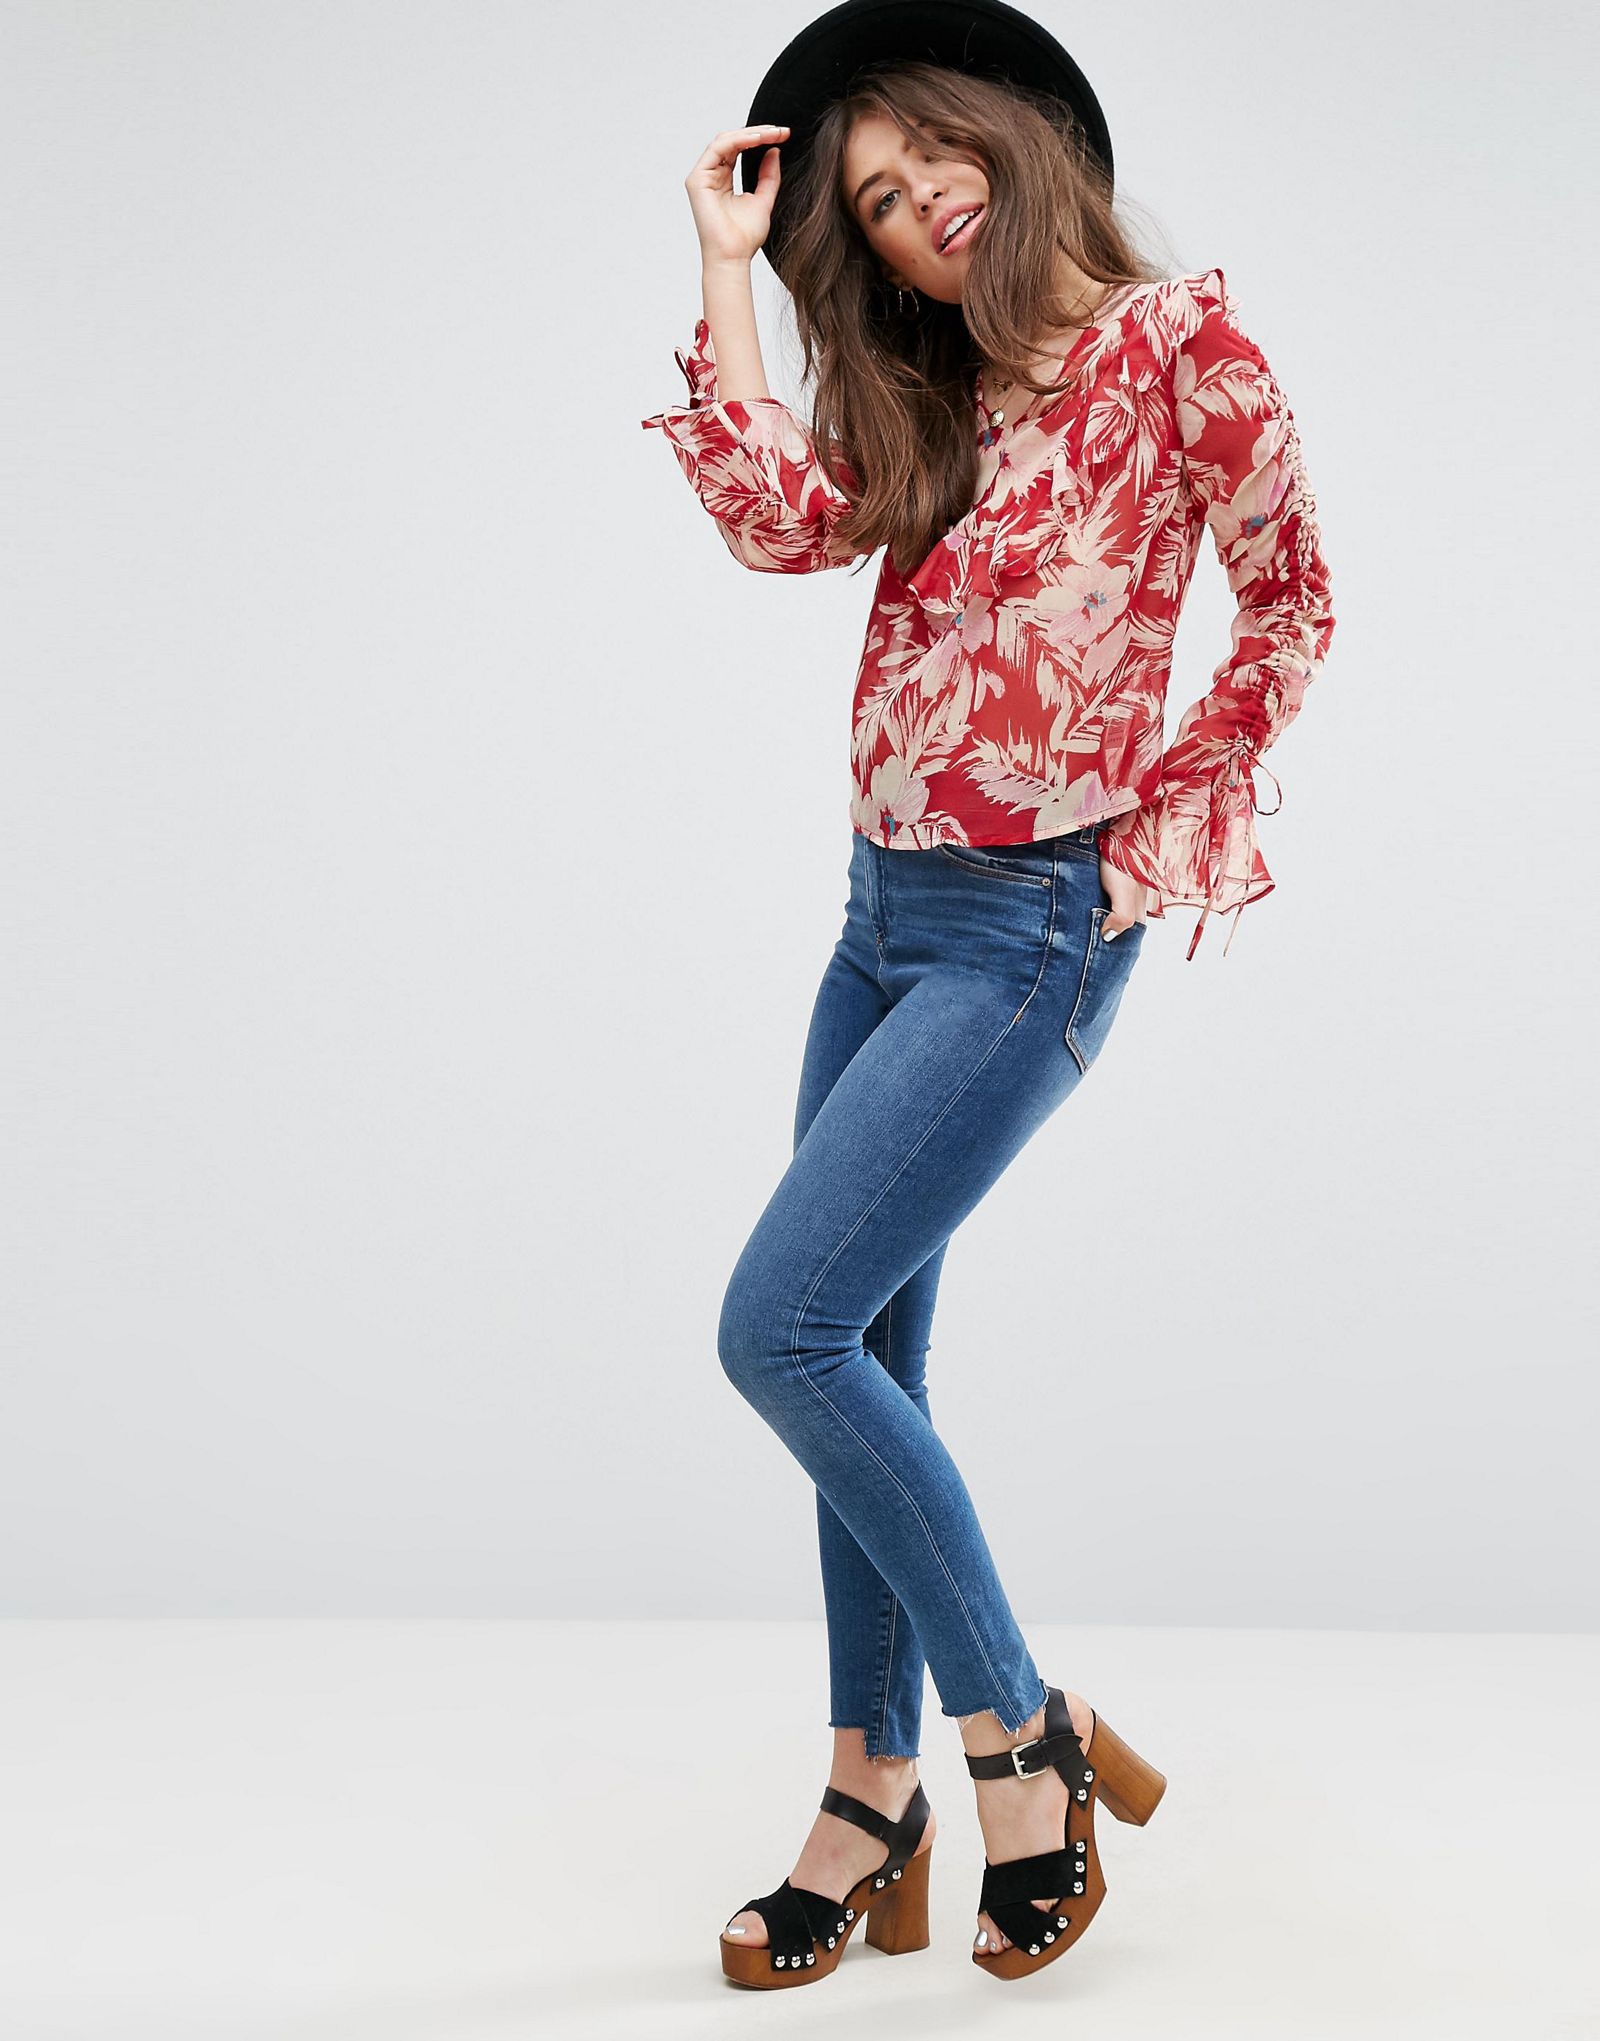 ASOS Floaty Blouse In Red Floral with Ruffles